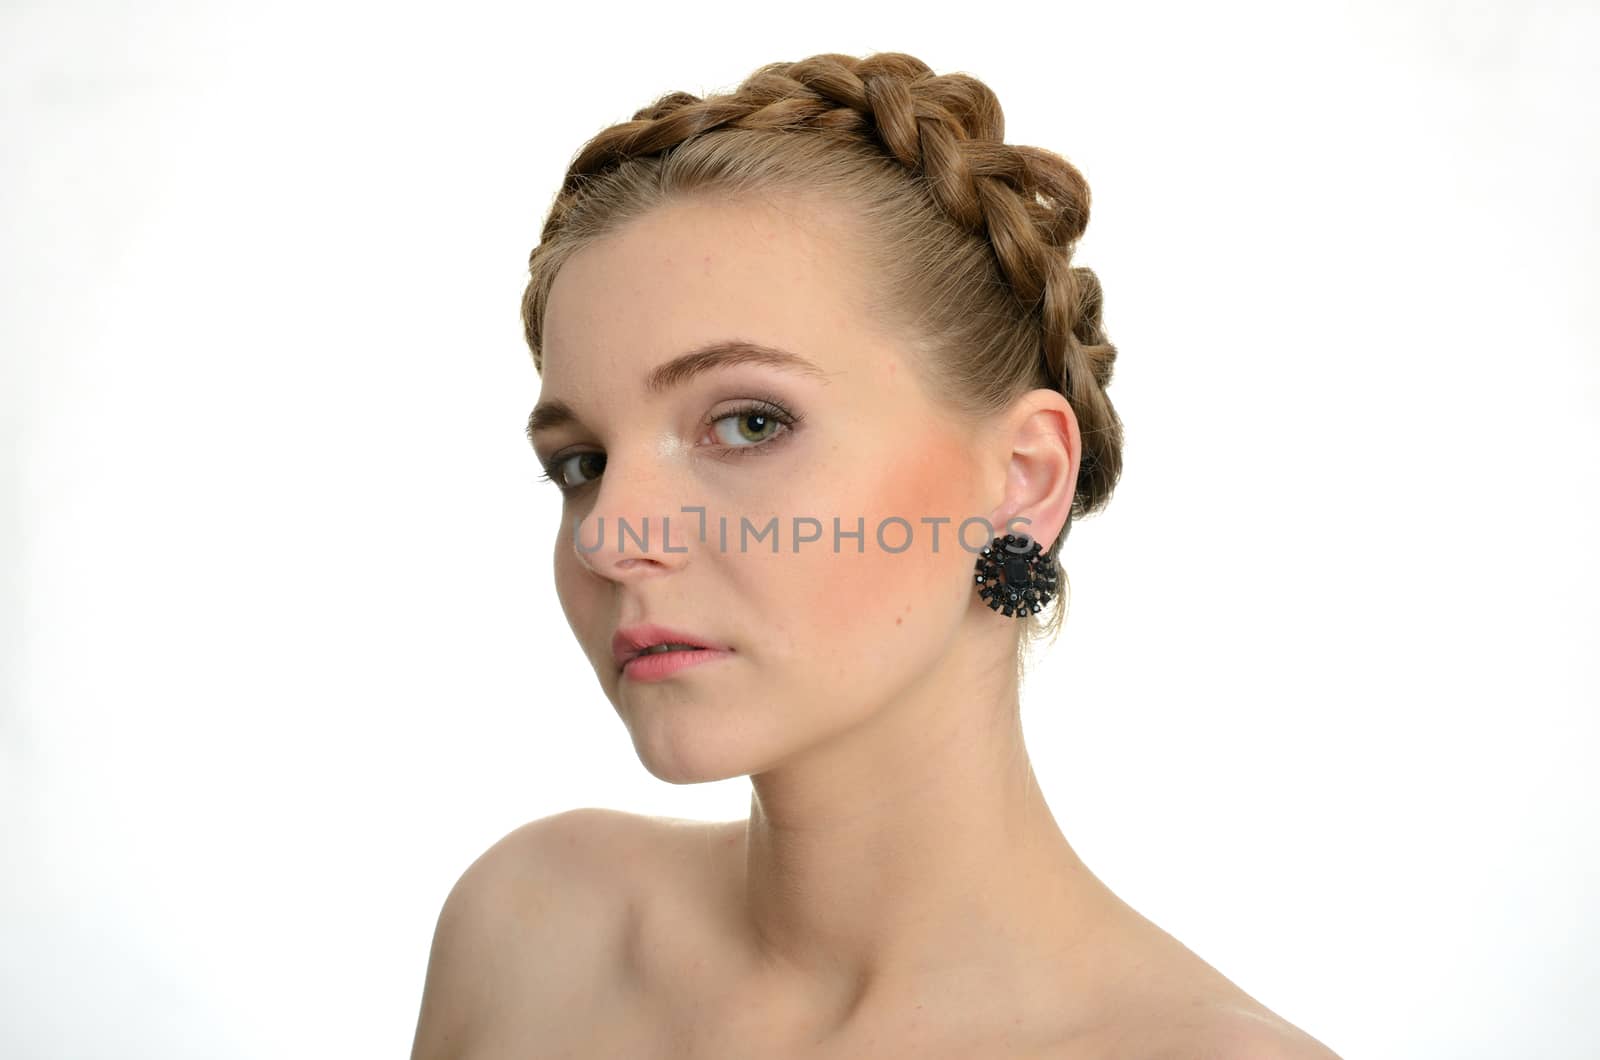 Young female model wearing black earrings. Gentle face expression.